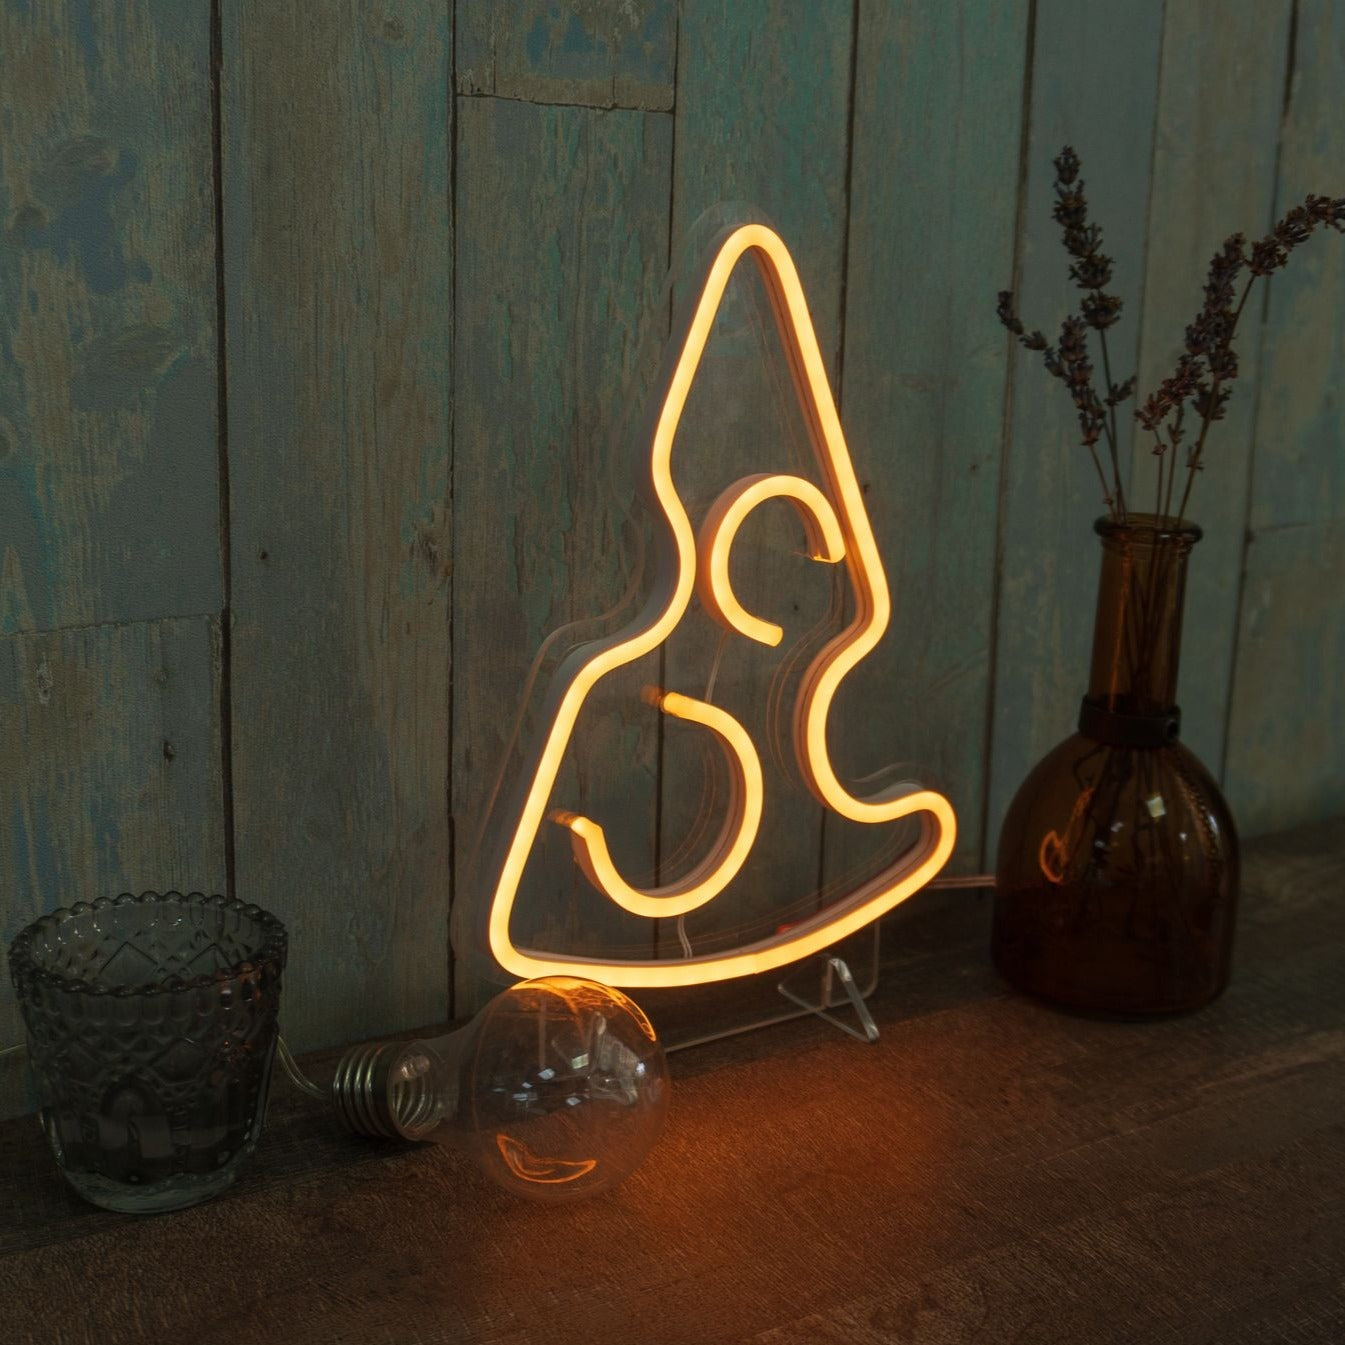 Piece Of Cheese LED Mini Neon Sign